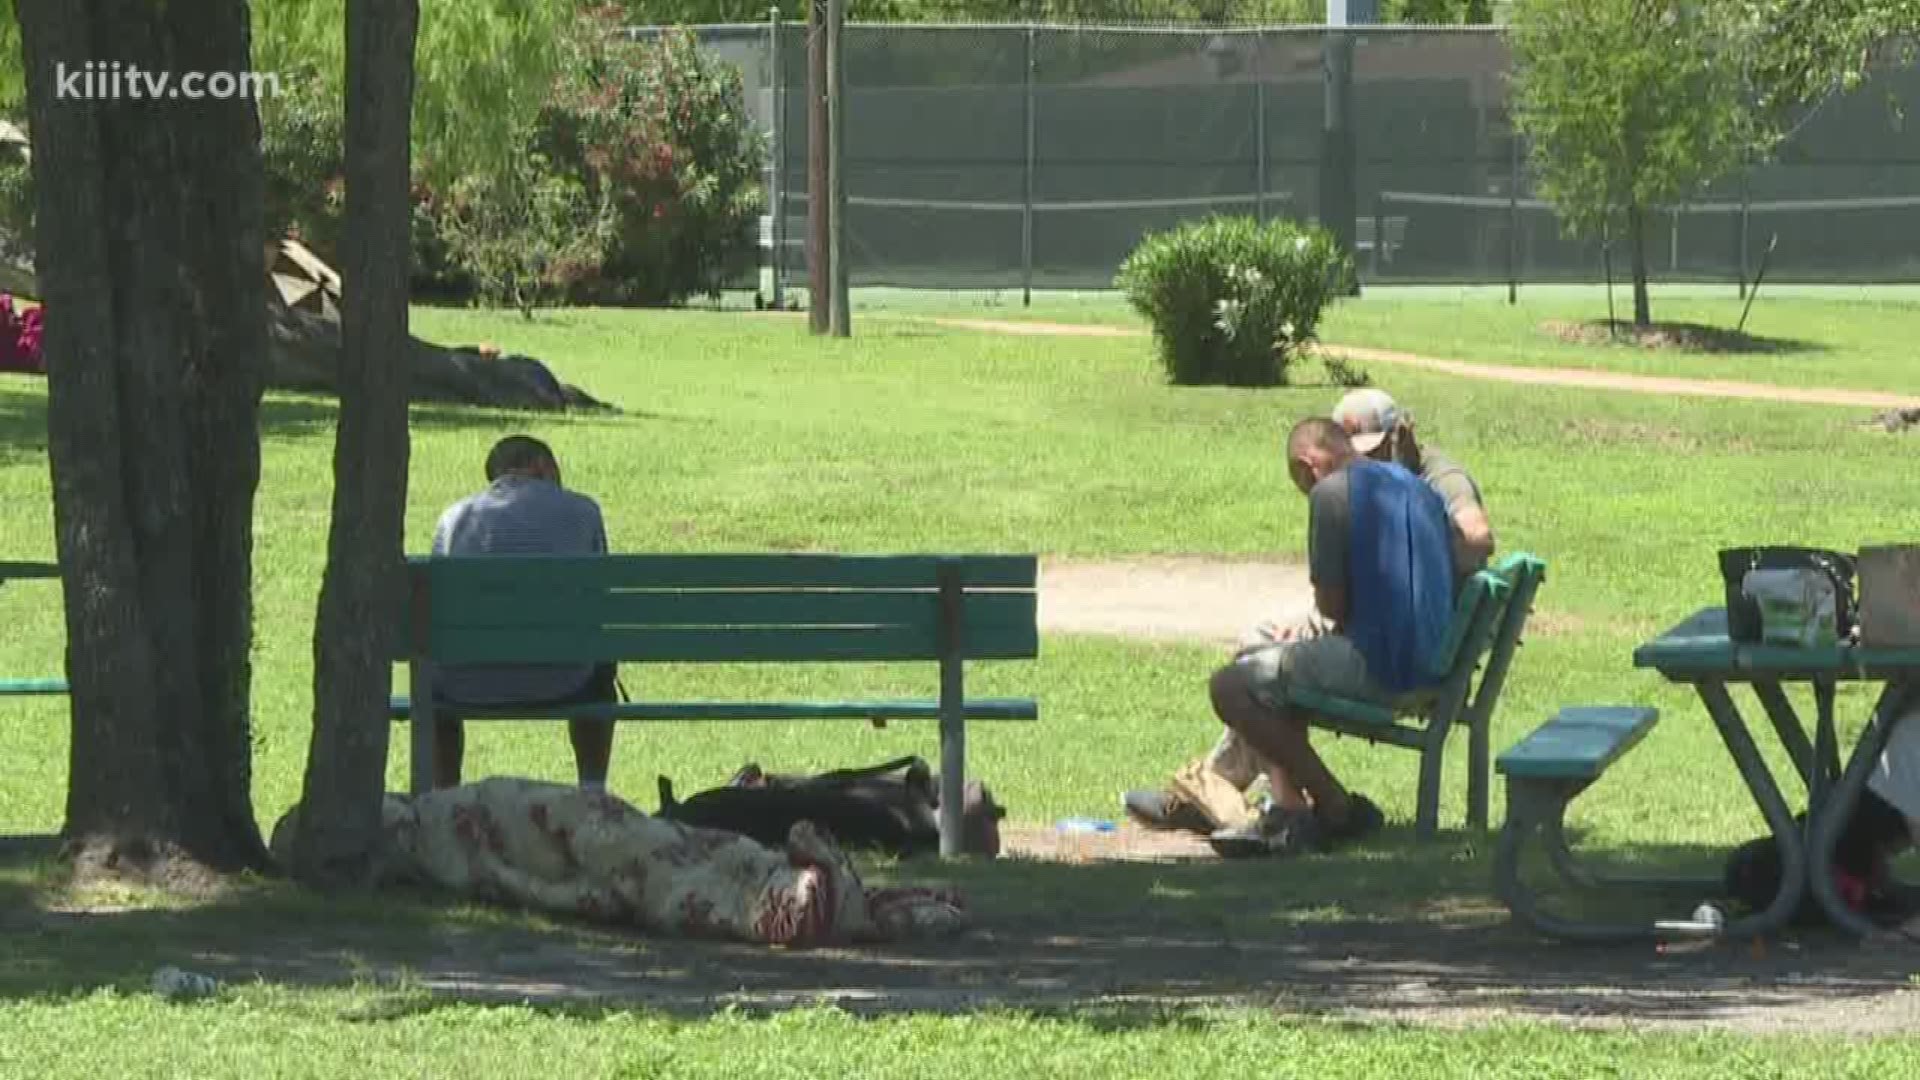 The homeless who were spending the lunch hour near South Bluff Park on Friday got an unexpected treat.